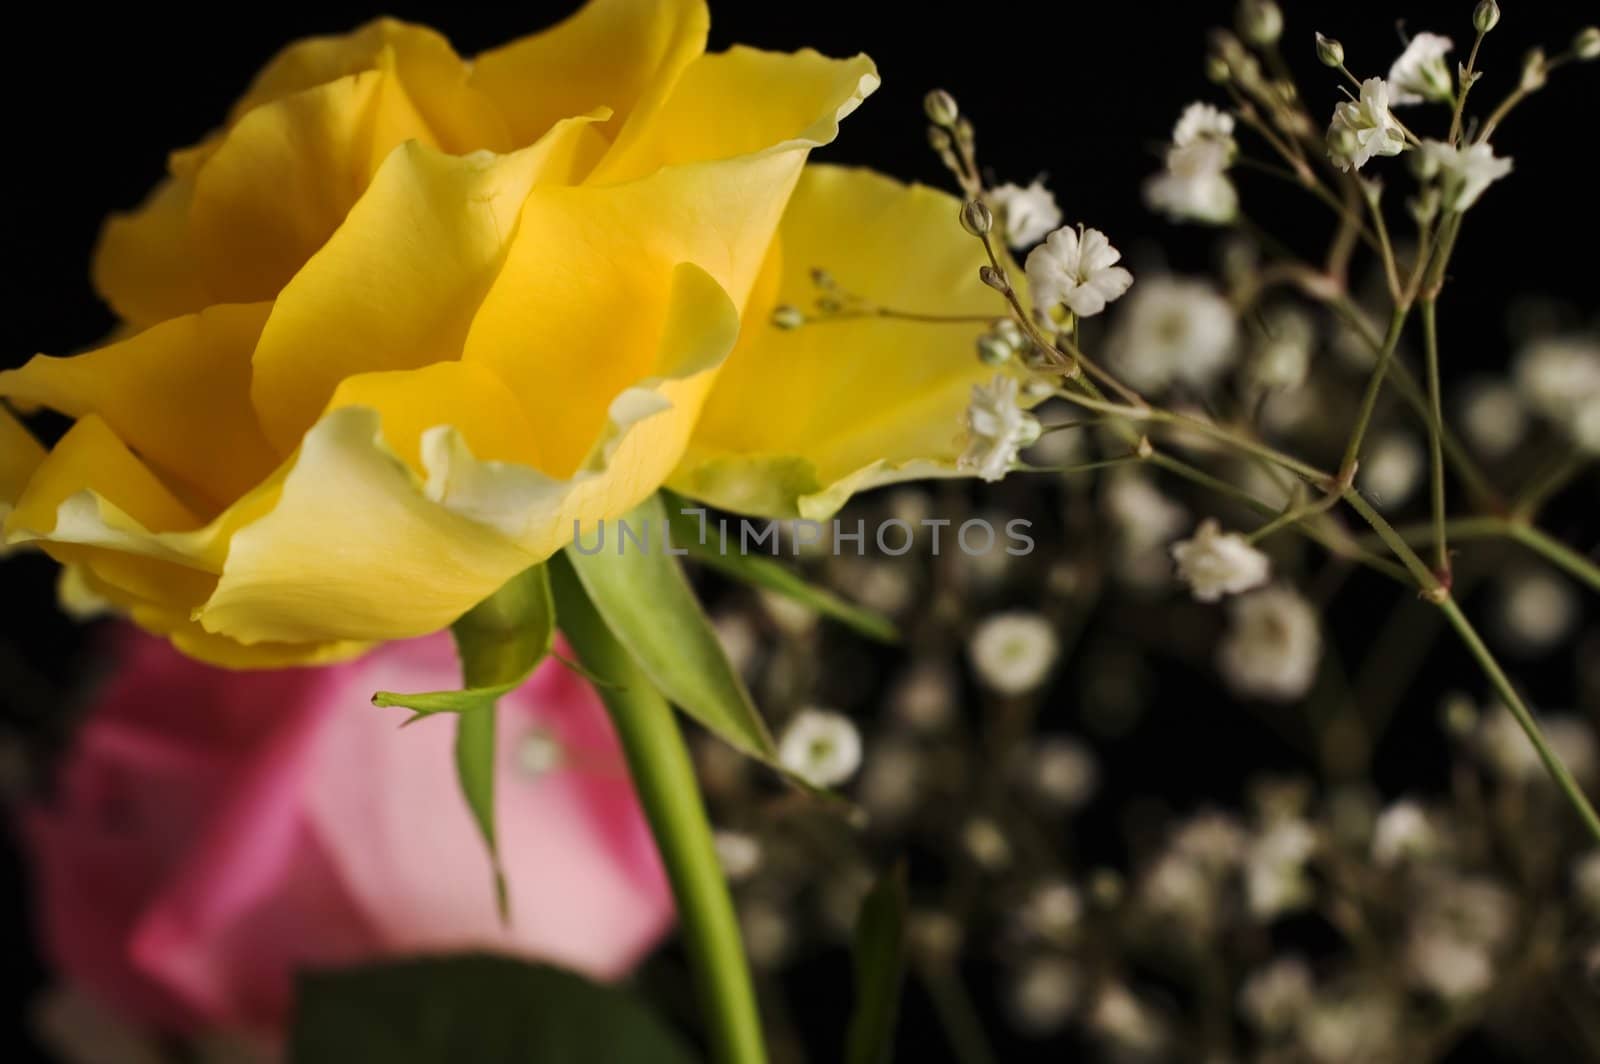 Yellow rose in a bouquet on black background with shallow depth of field